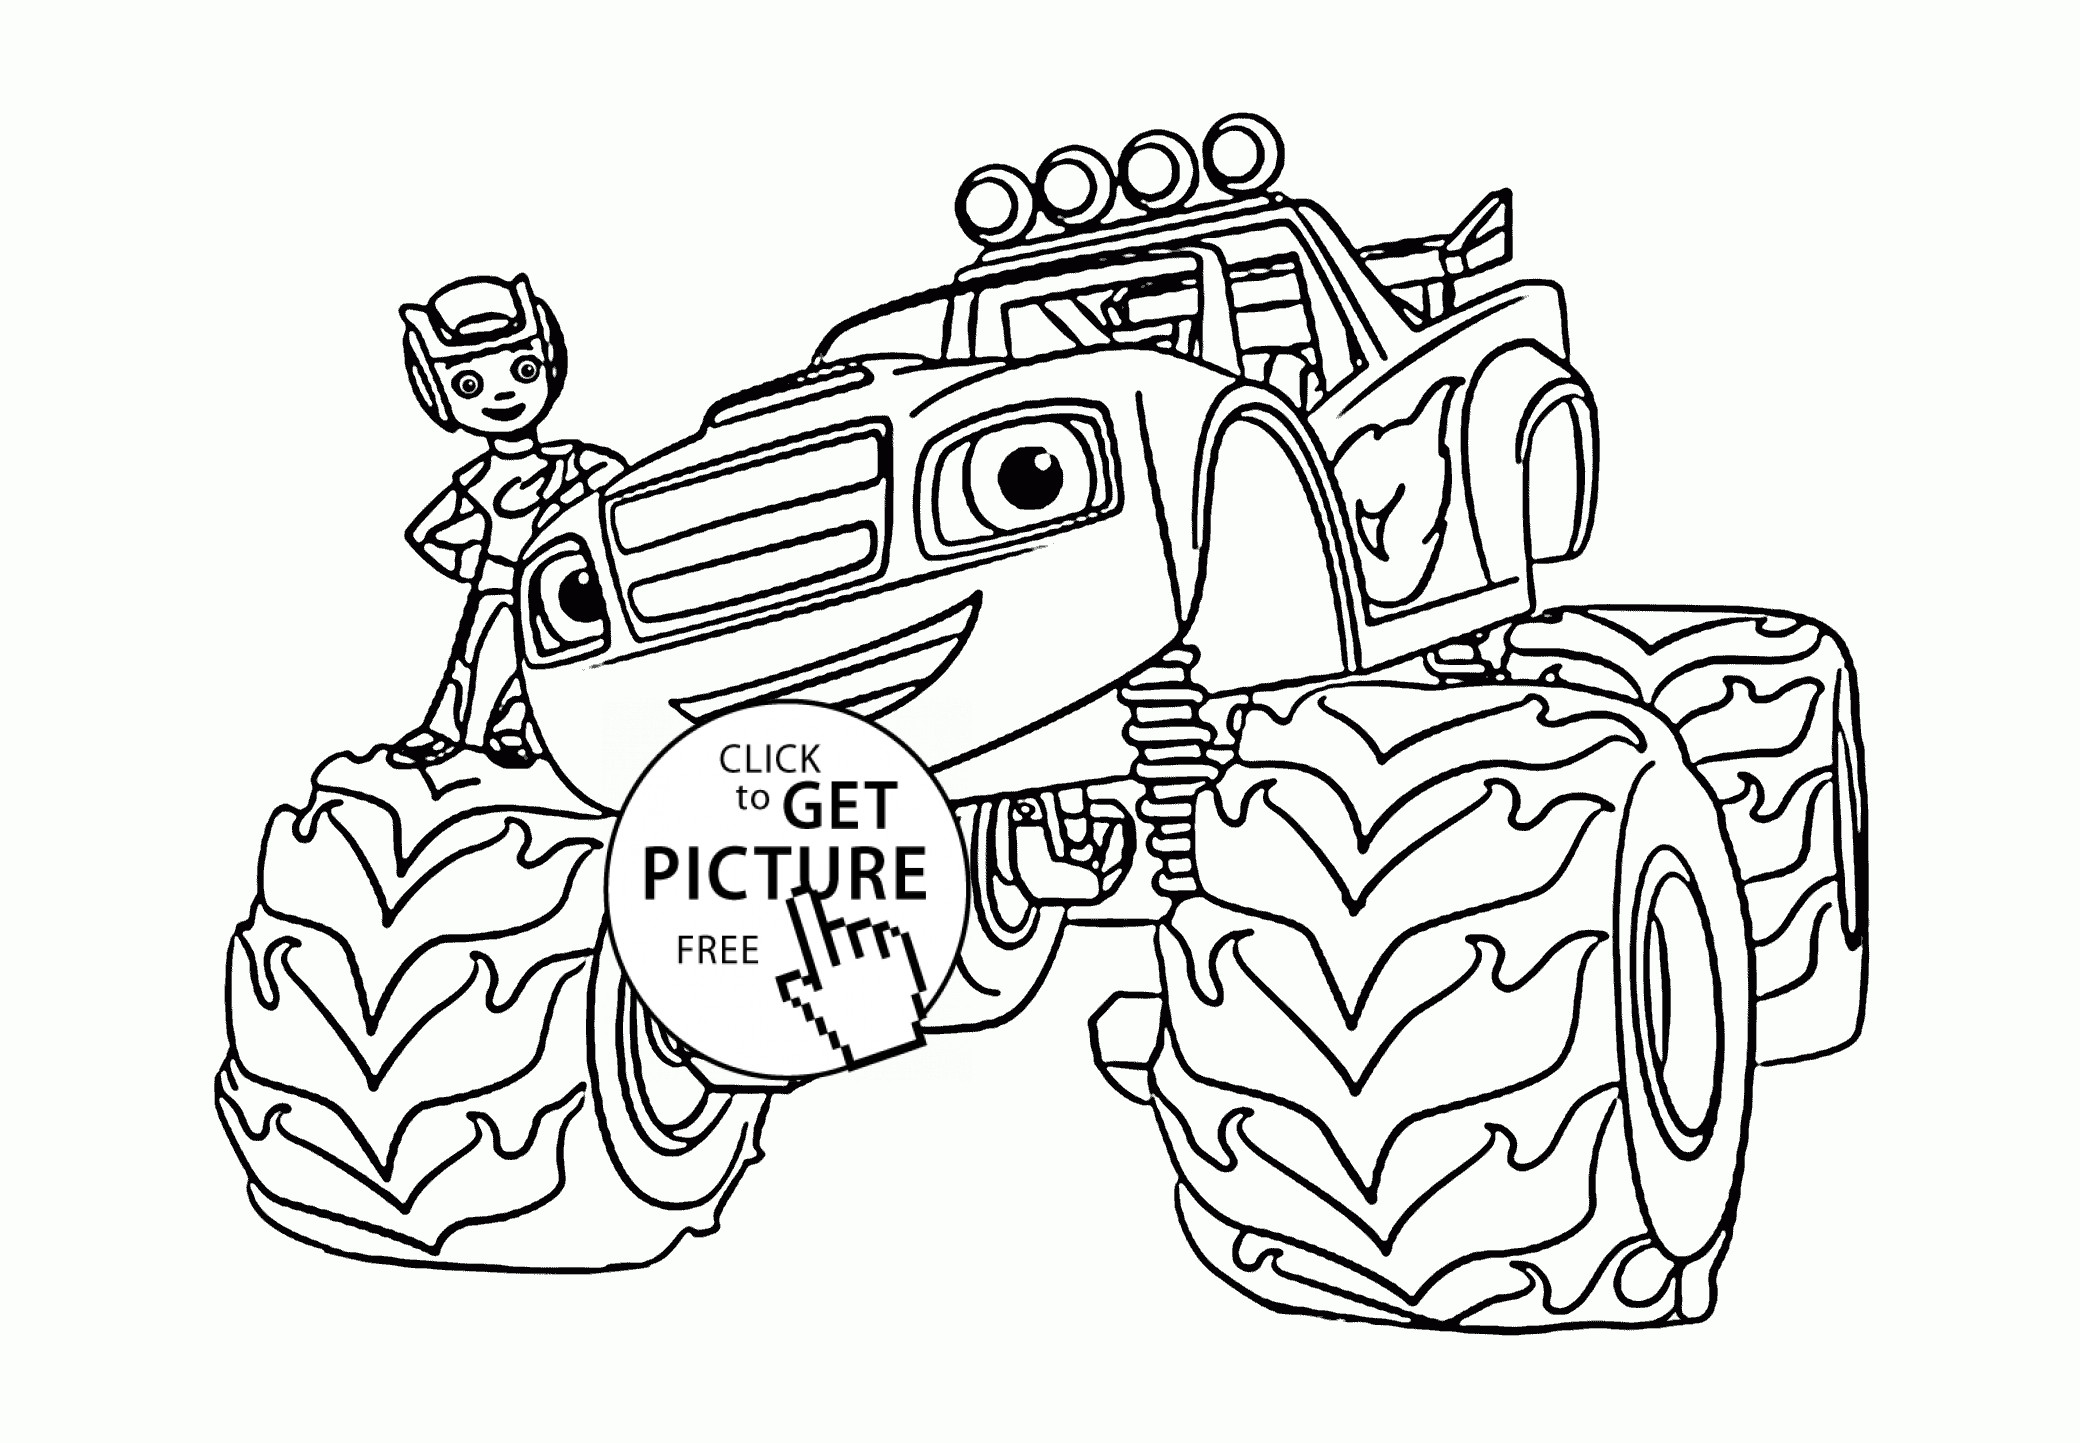 Blaze And The Monster Machines Printable Coloring Pages at GetColorings